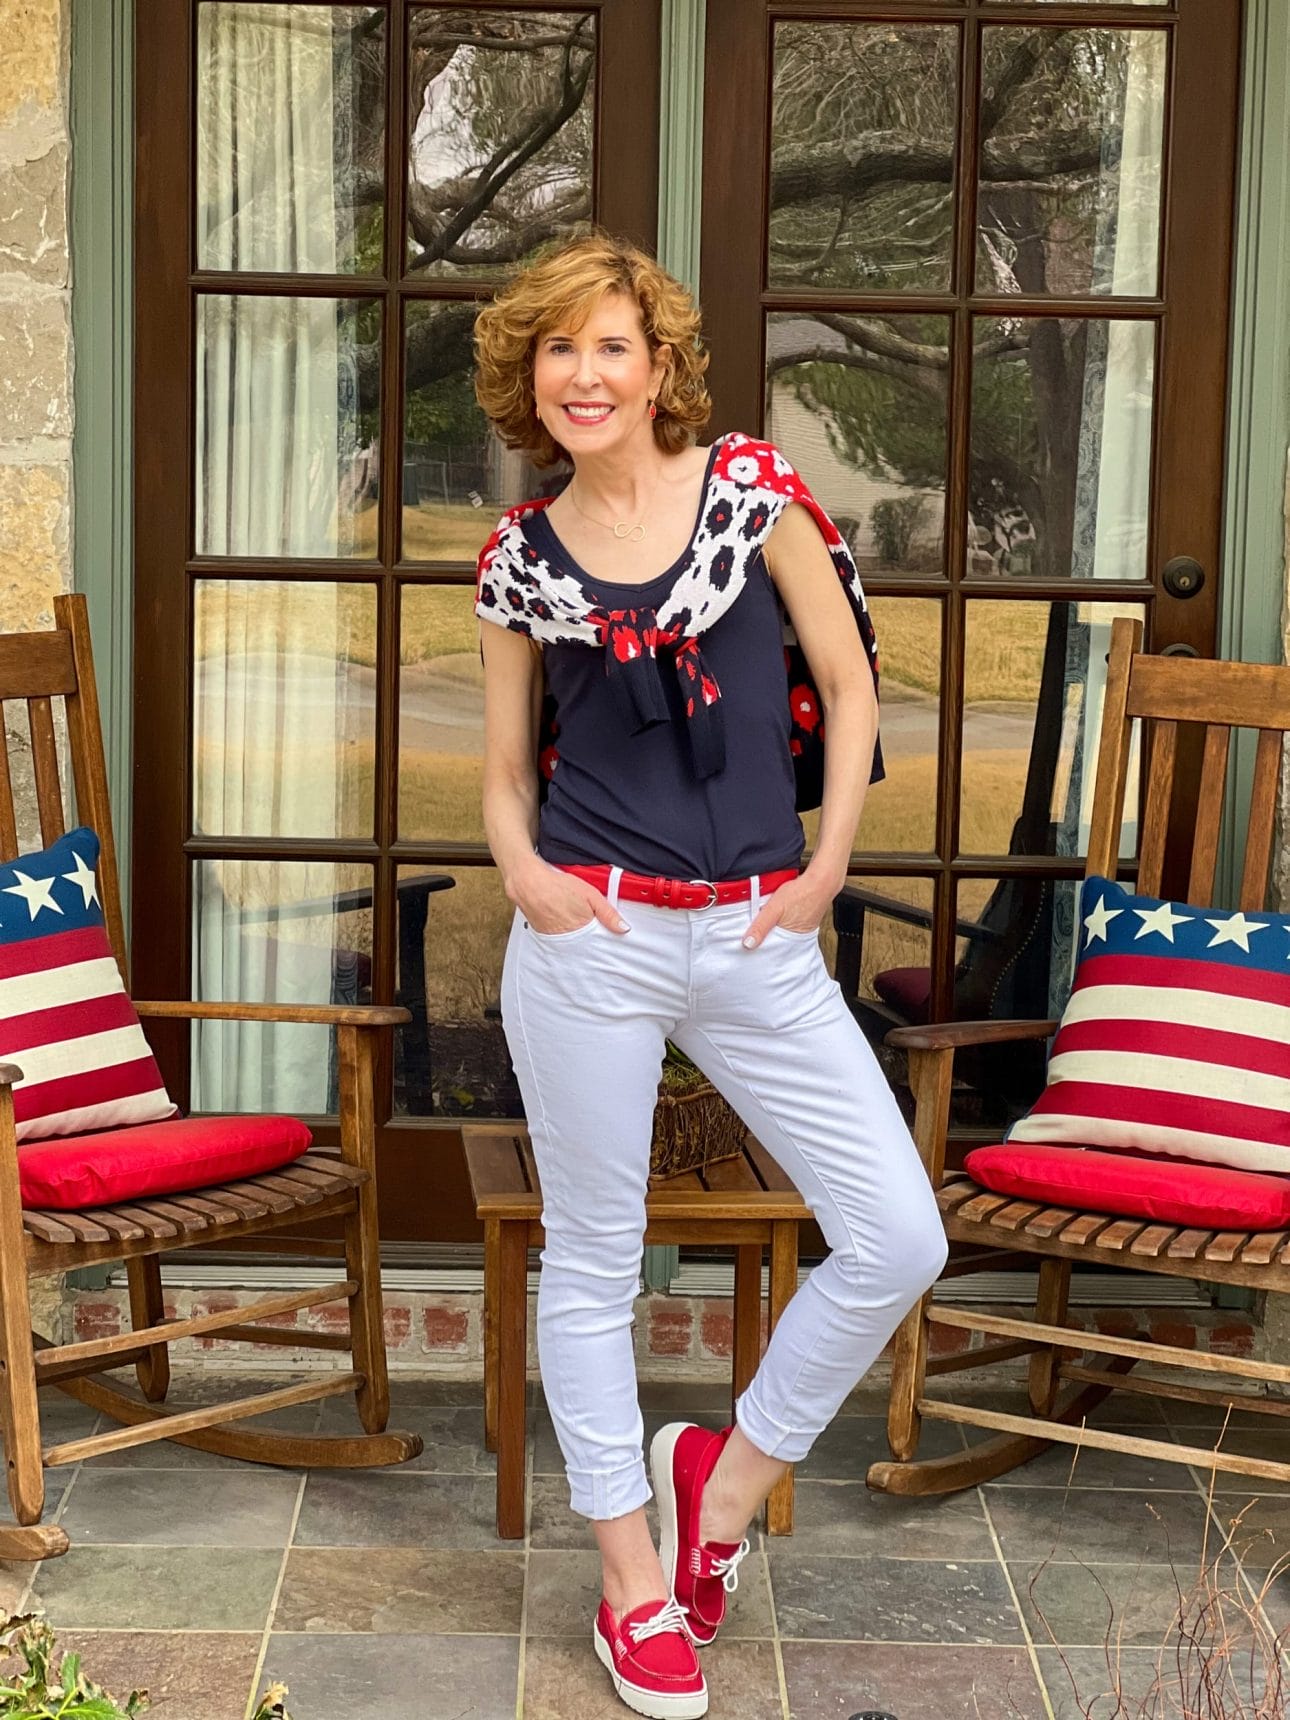 woman over 50 standing on a front porch with rocking chairs and patriotic pillows wearing from the 2022 cabi spring collection including white the skinny jeans, navy blue busy tank, and the upbeat cardigan tied around her shoulders